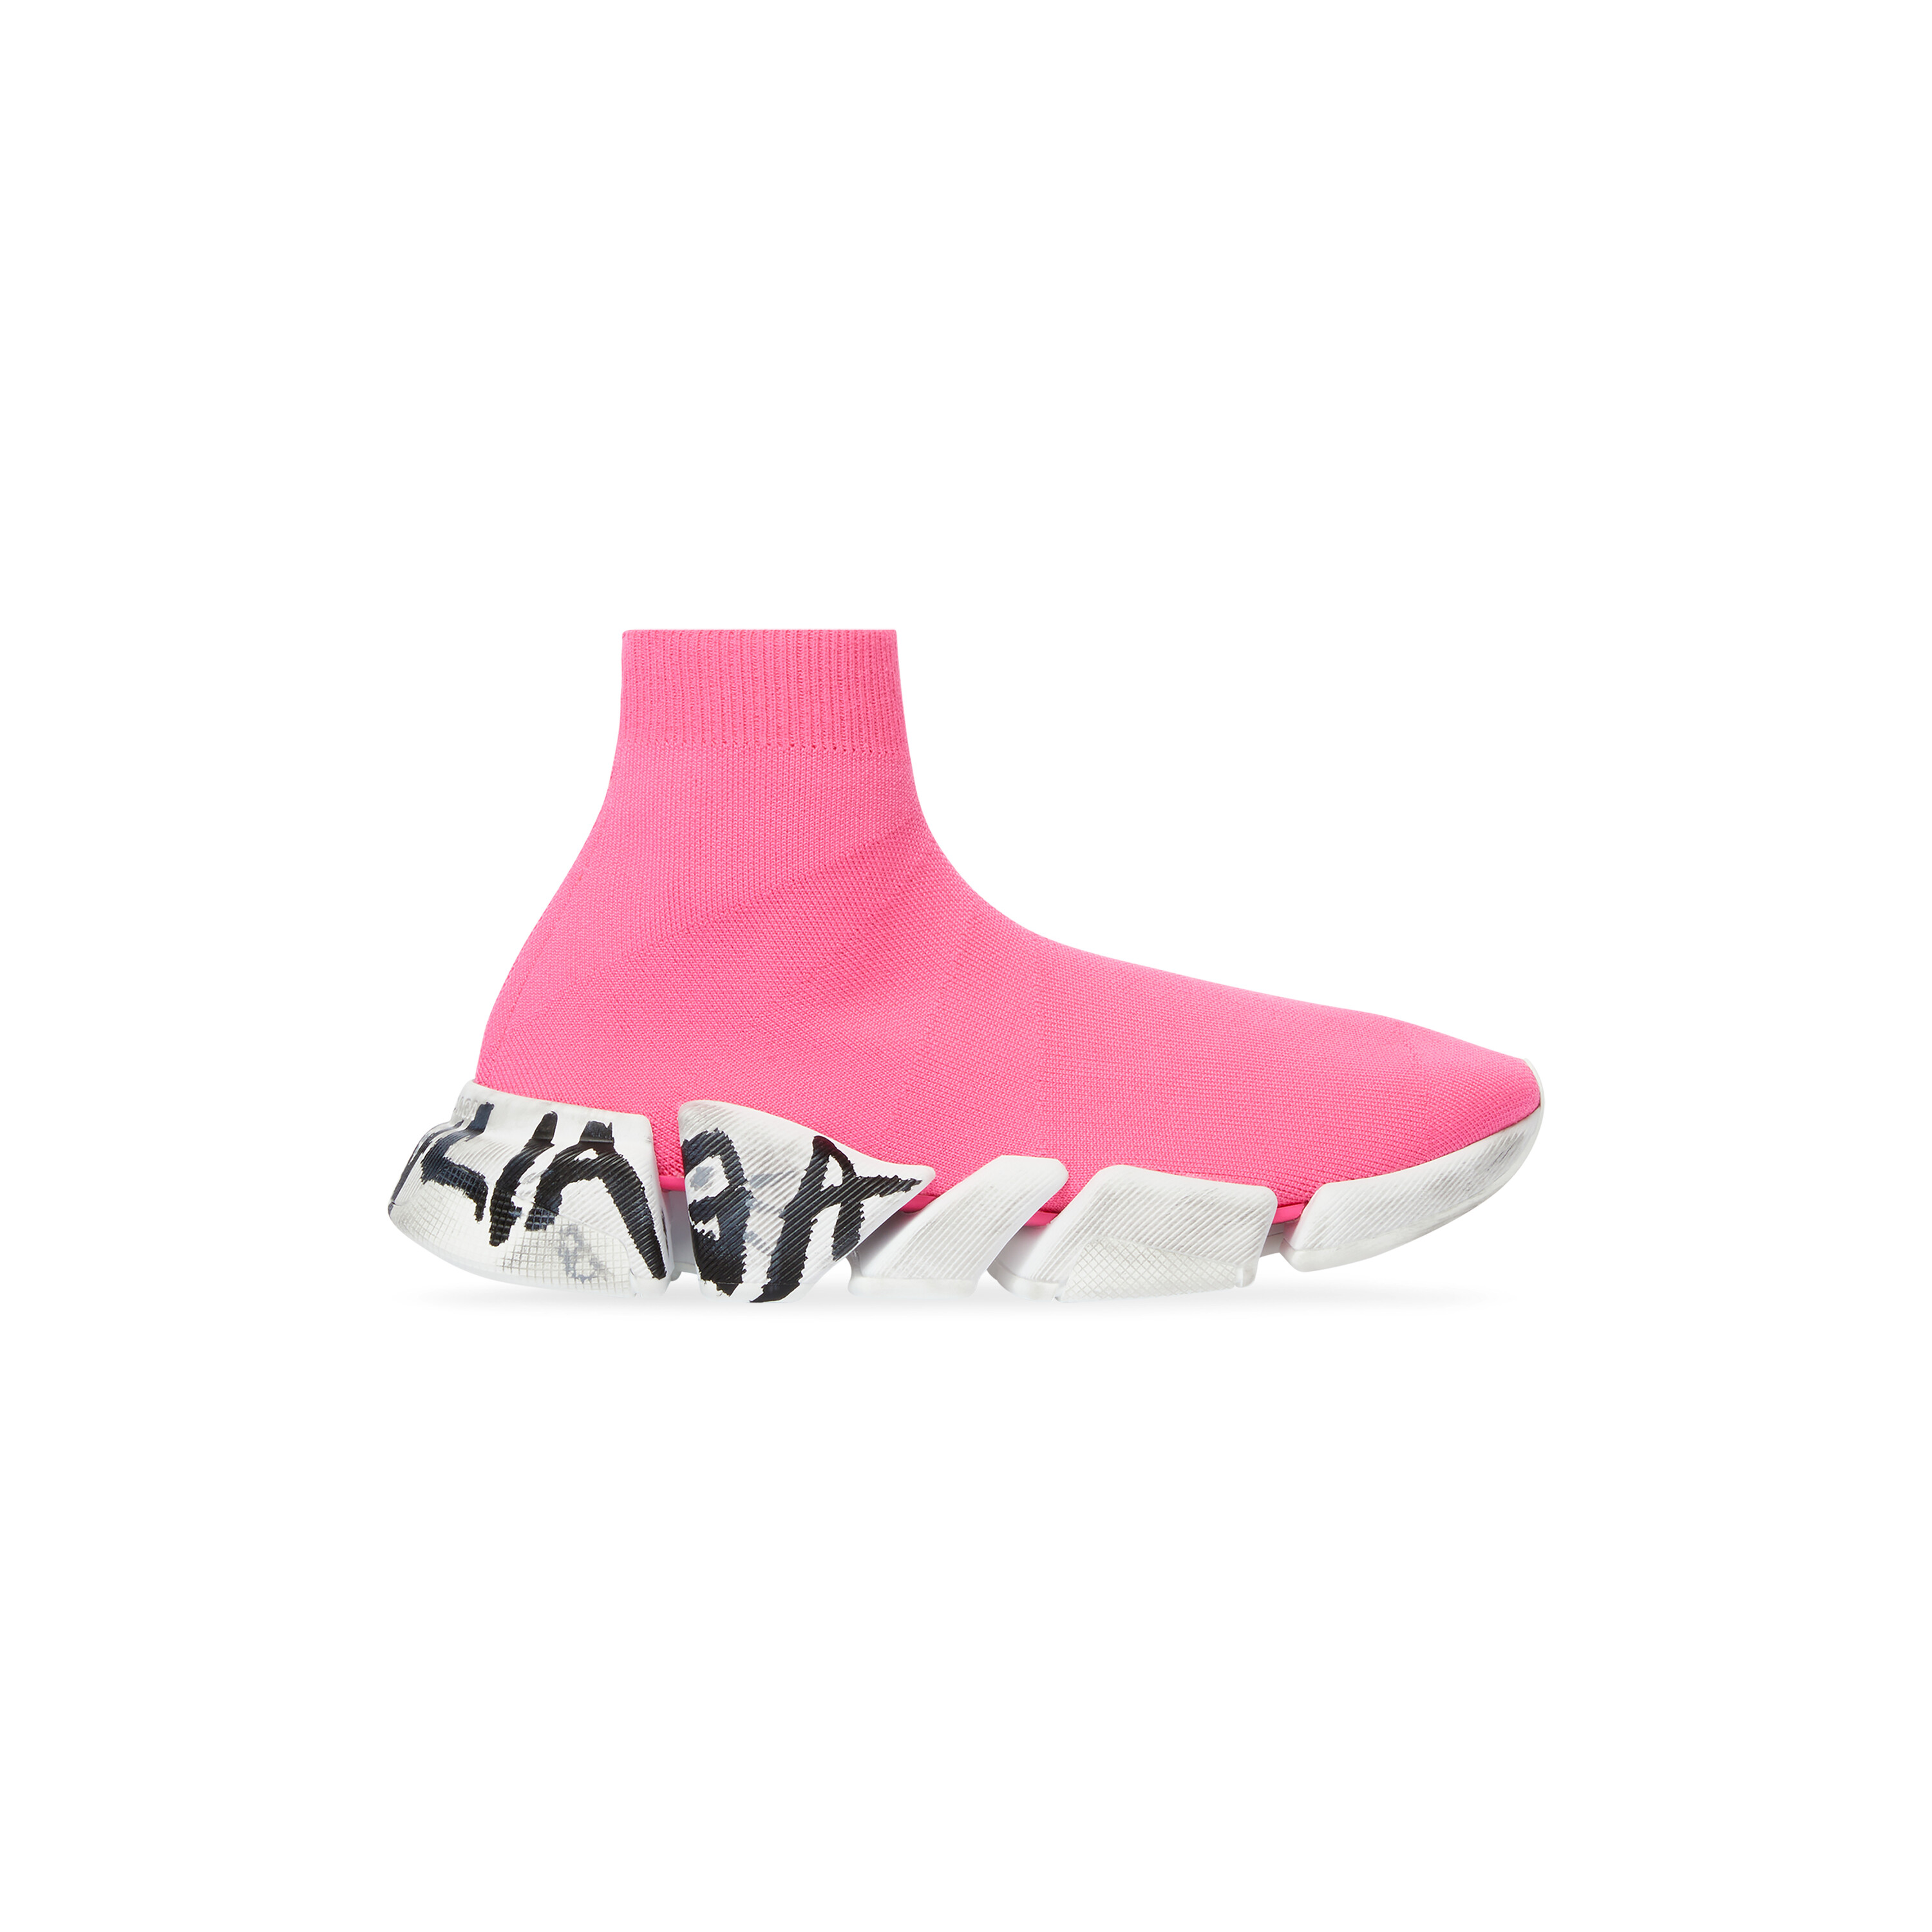 balenciaga.com | Speed 2.0 Graffiti Trainers in pink recycled knit and white sole unit